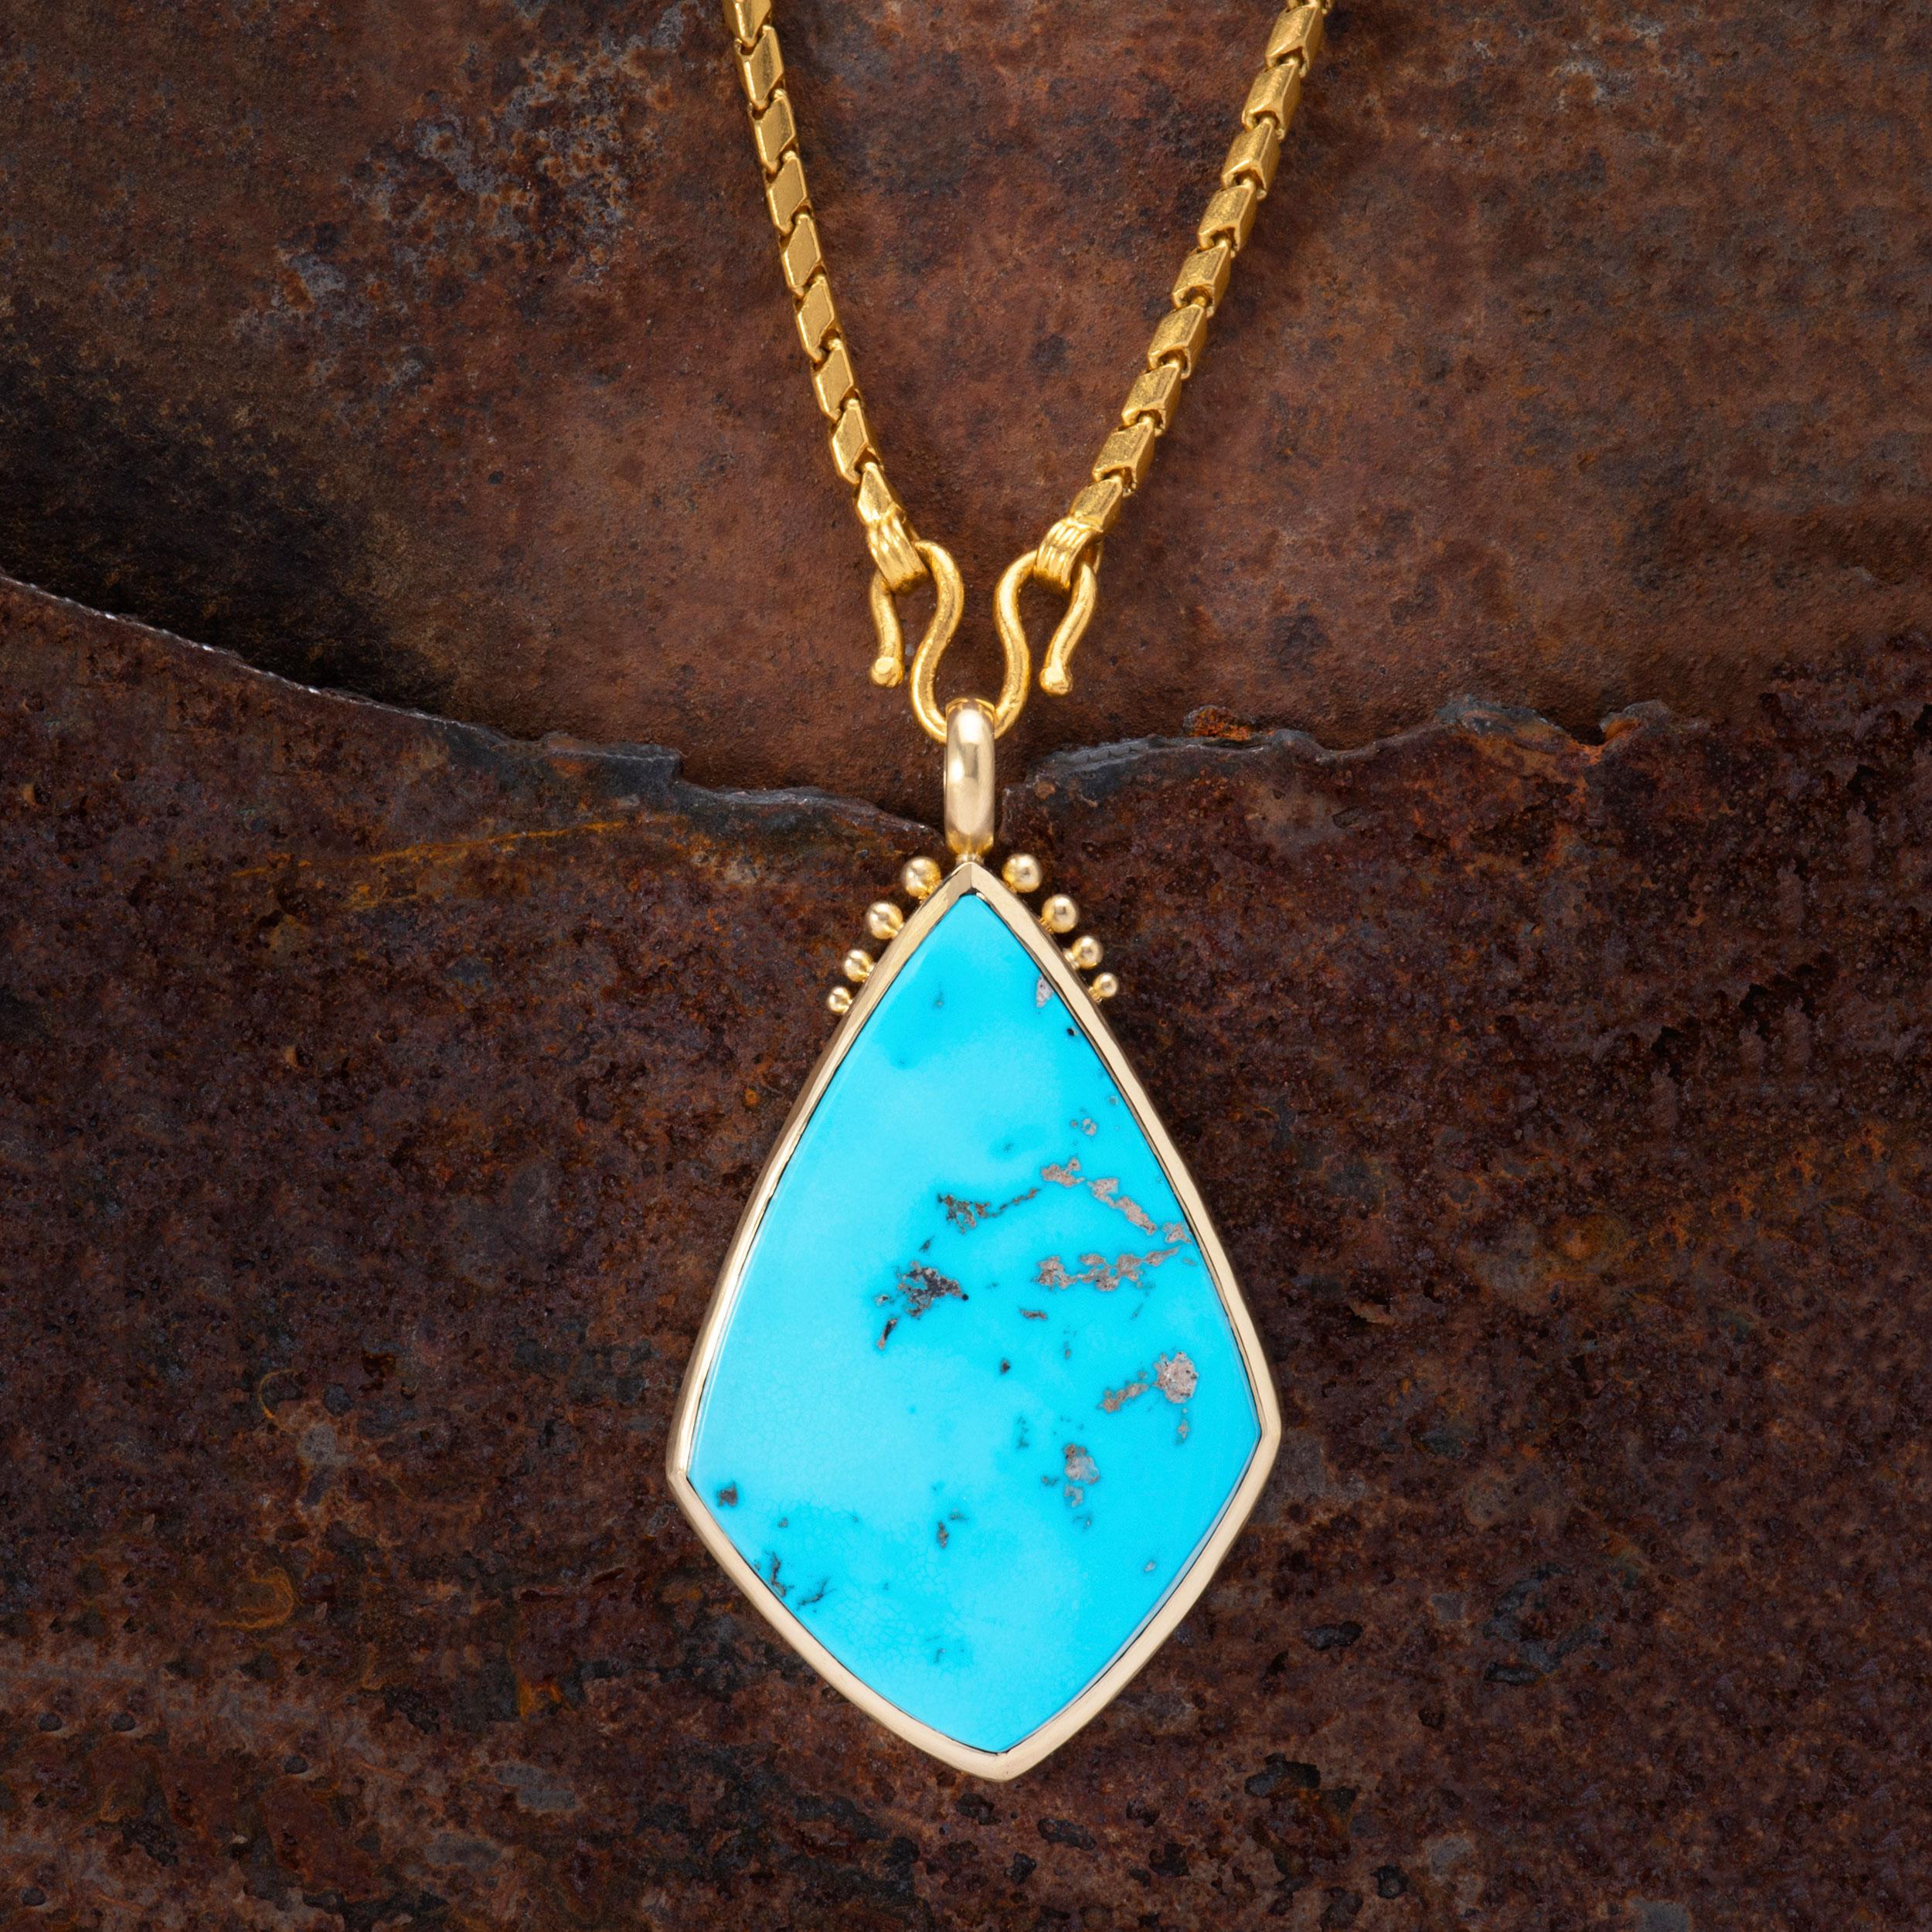 A classic, bright cabochon of Sleeping Beauty Turquoise weighing 120 carats is peppered with pale silvery and mocha colored matrix. Turquoise from the Sleeping Beauty Mine in Arizona is renowned for it's clarity and sky blue color. This striking